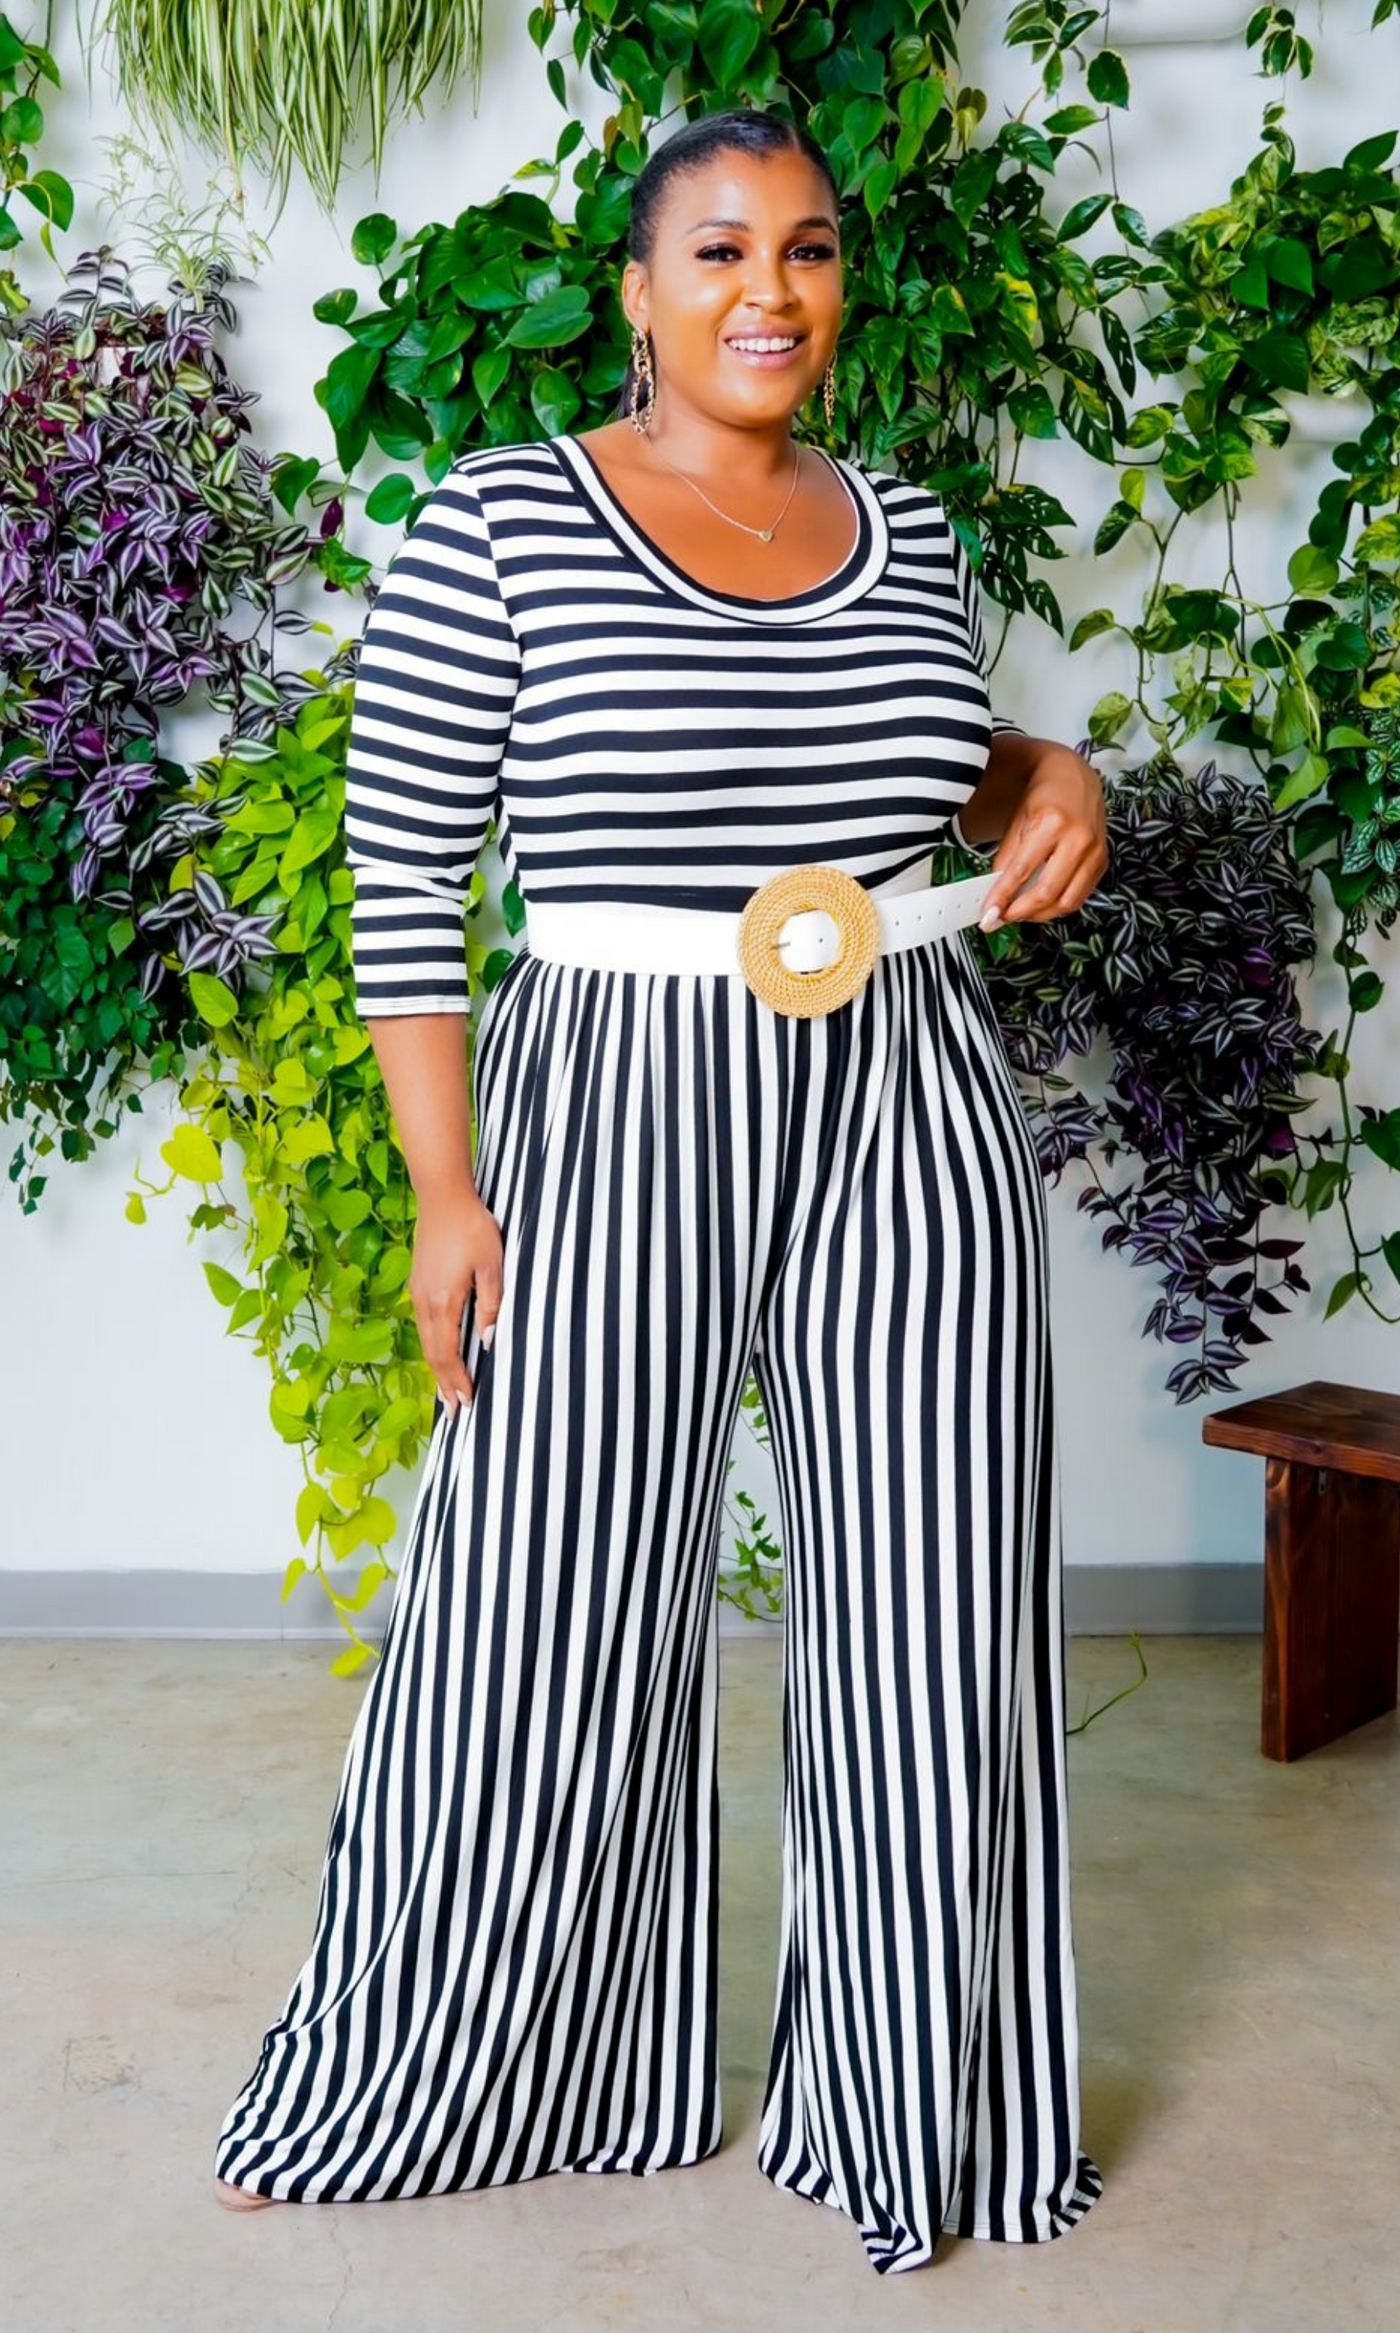 Beauty Is Her Name 2 l Striped Jumpsuit - Cutely Covered